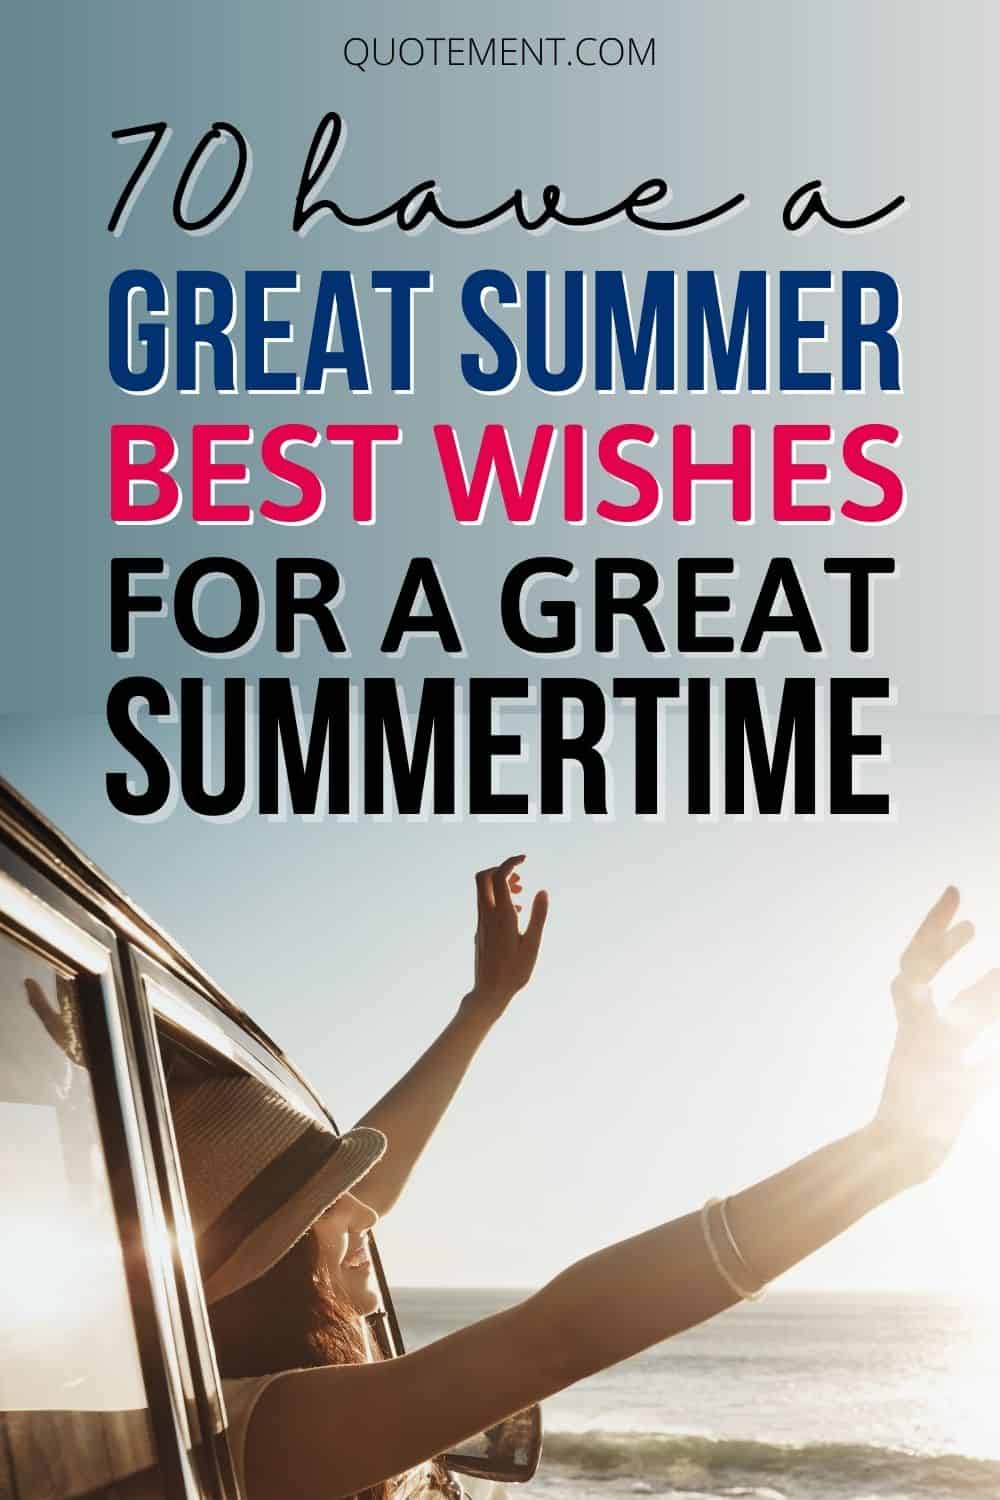 70 Have A Great Summer Best Wishes For A Great Summertime